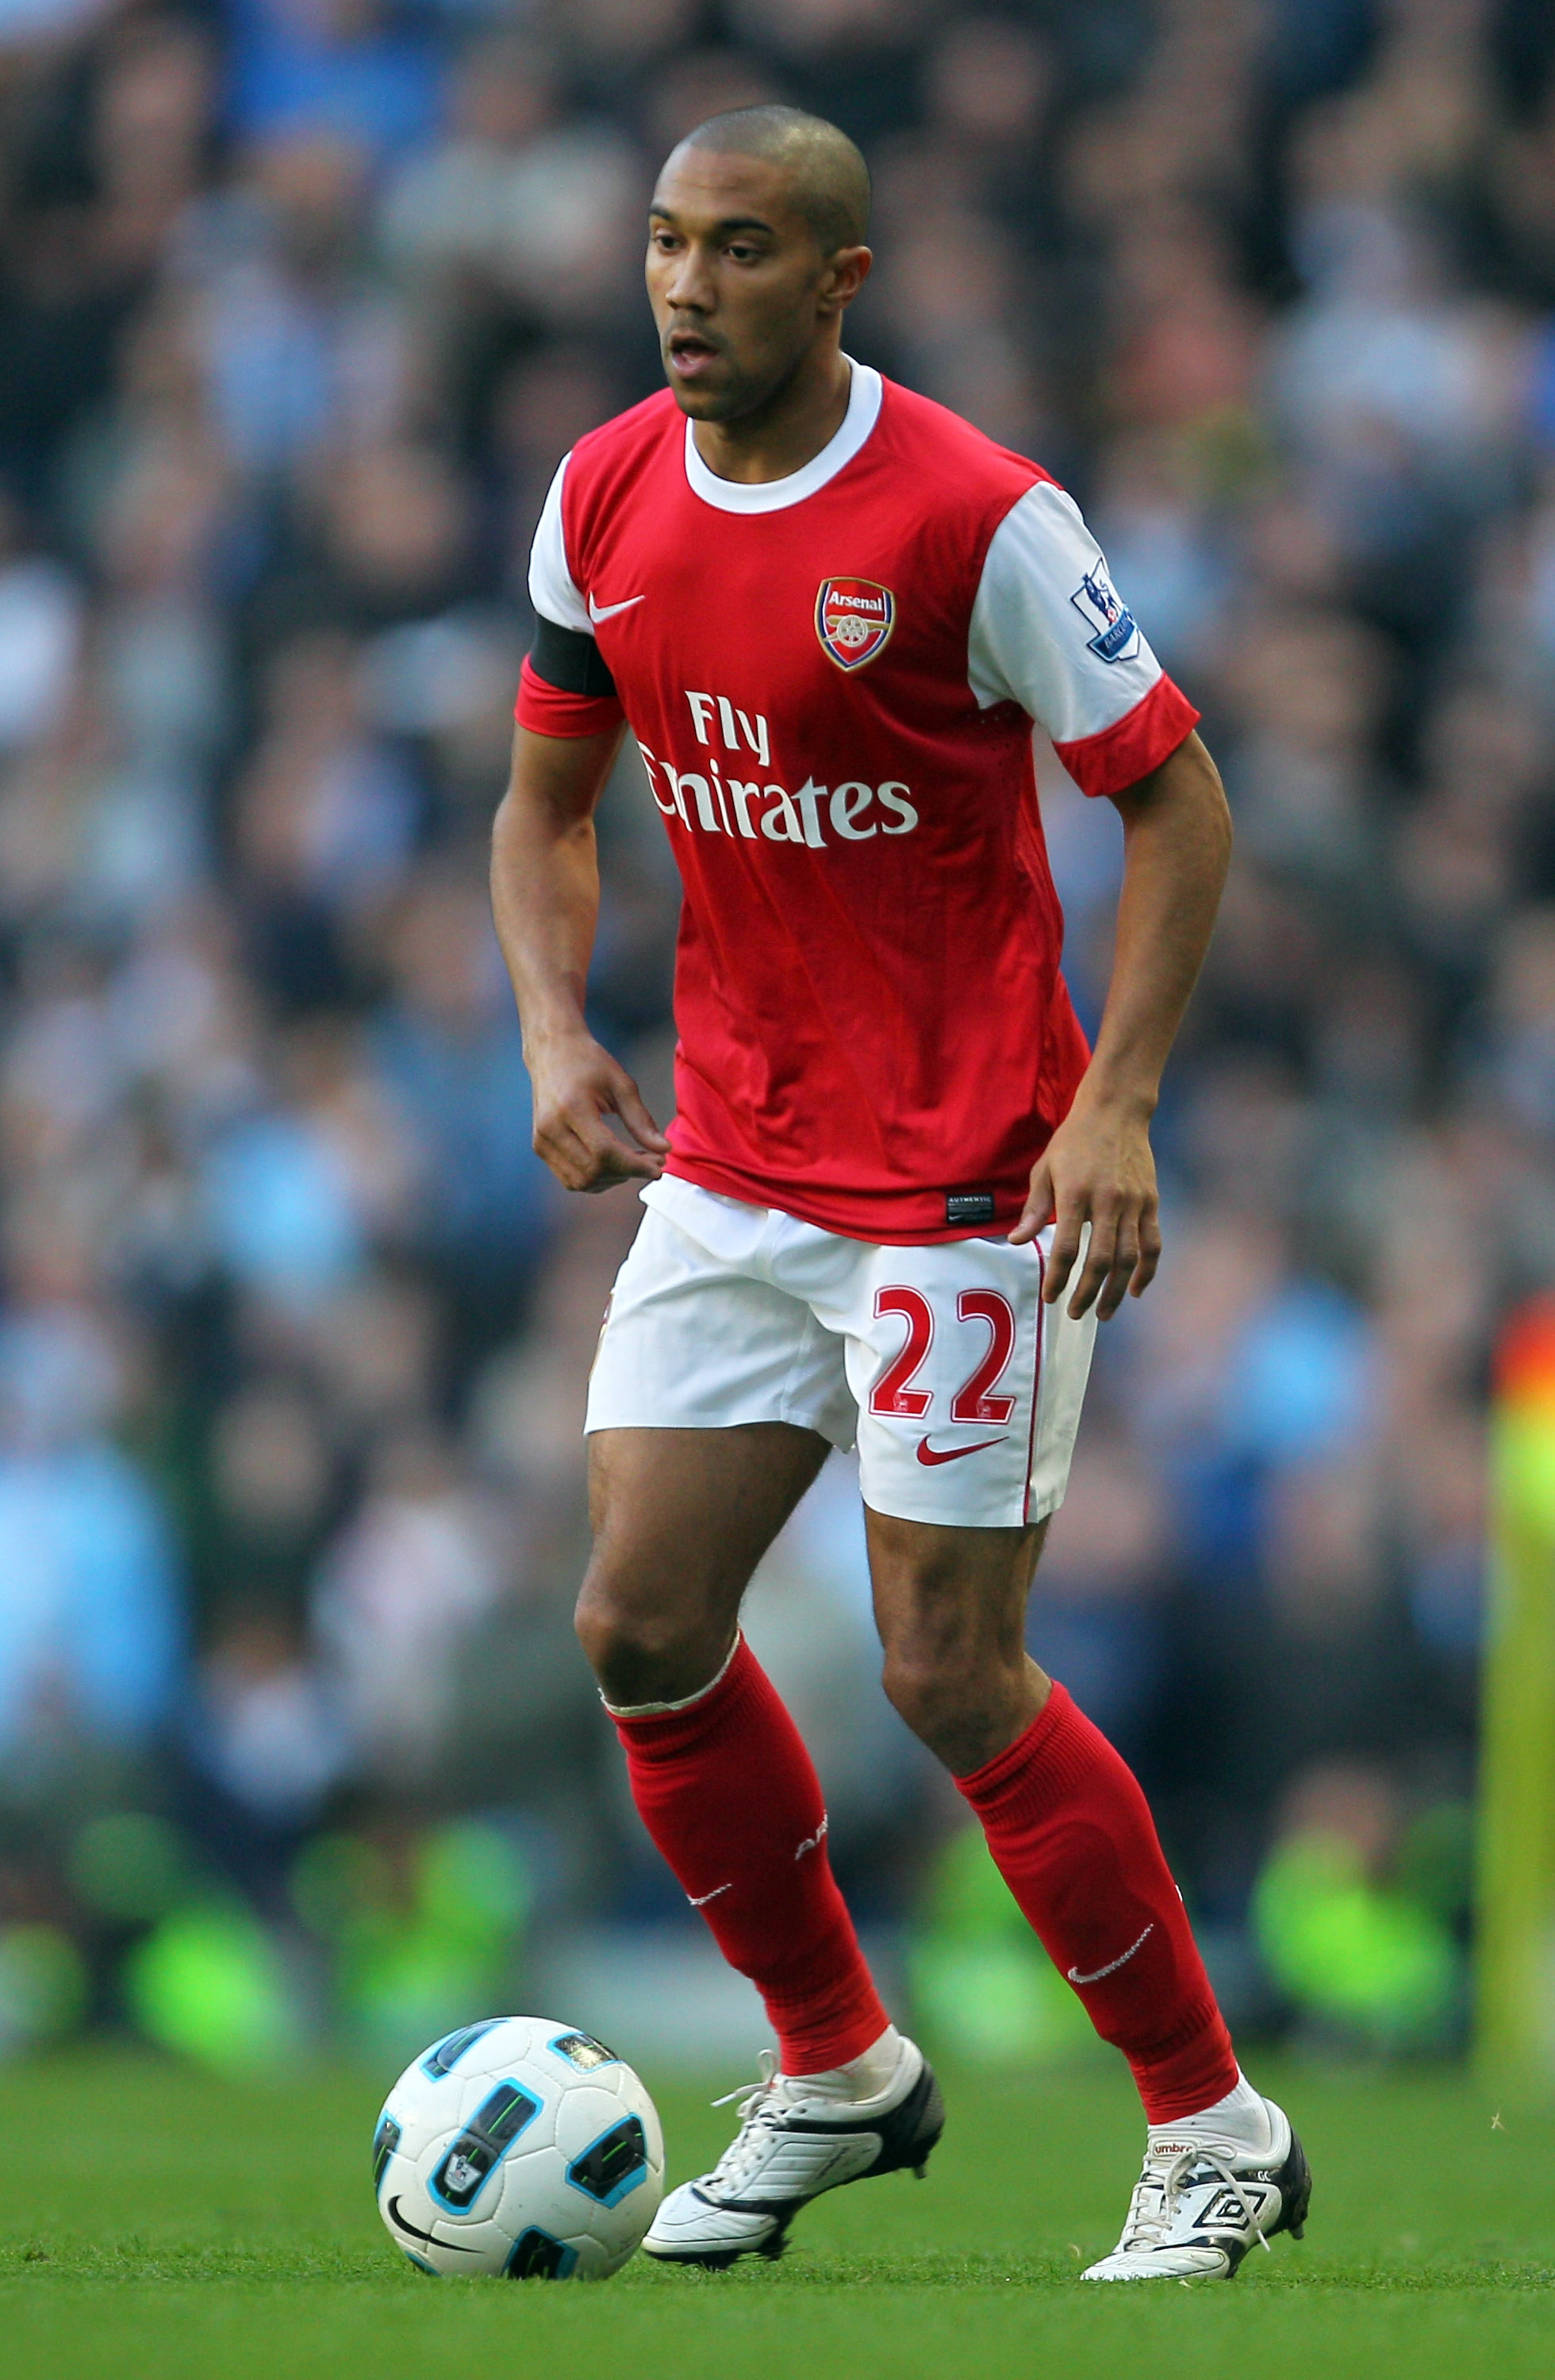 MANCHESTER, ENGLAND - OCTOBER 24:  Gael Clichy of Arsenal in action during the Barclays Premier League match between Manchester City and Arsenal at City of Manchester Stadium on October 24, 2010 in Manchester, England.  (Photo by Clive Rose/Getty Images)